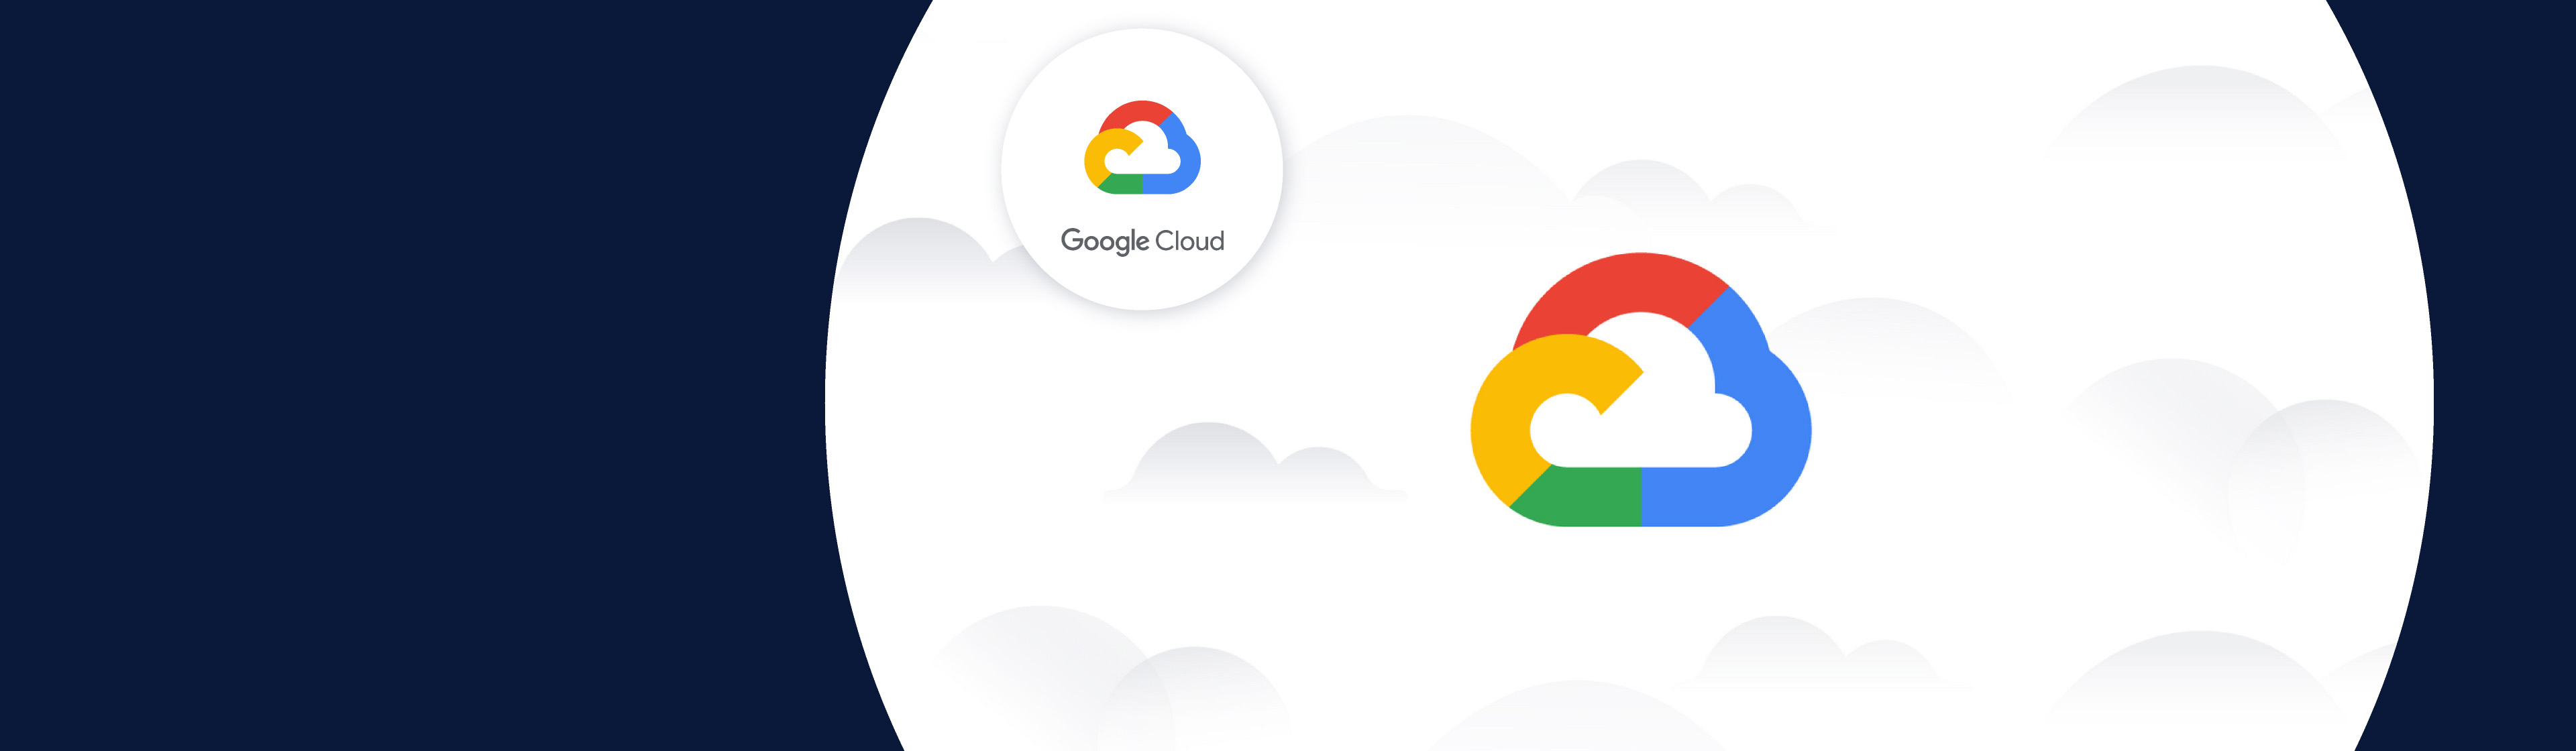 The Google Cloud icon amongst a white cloud background